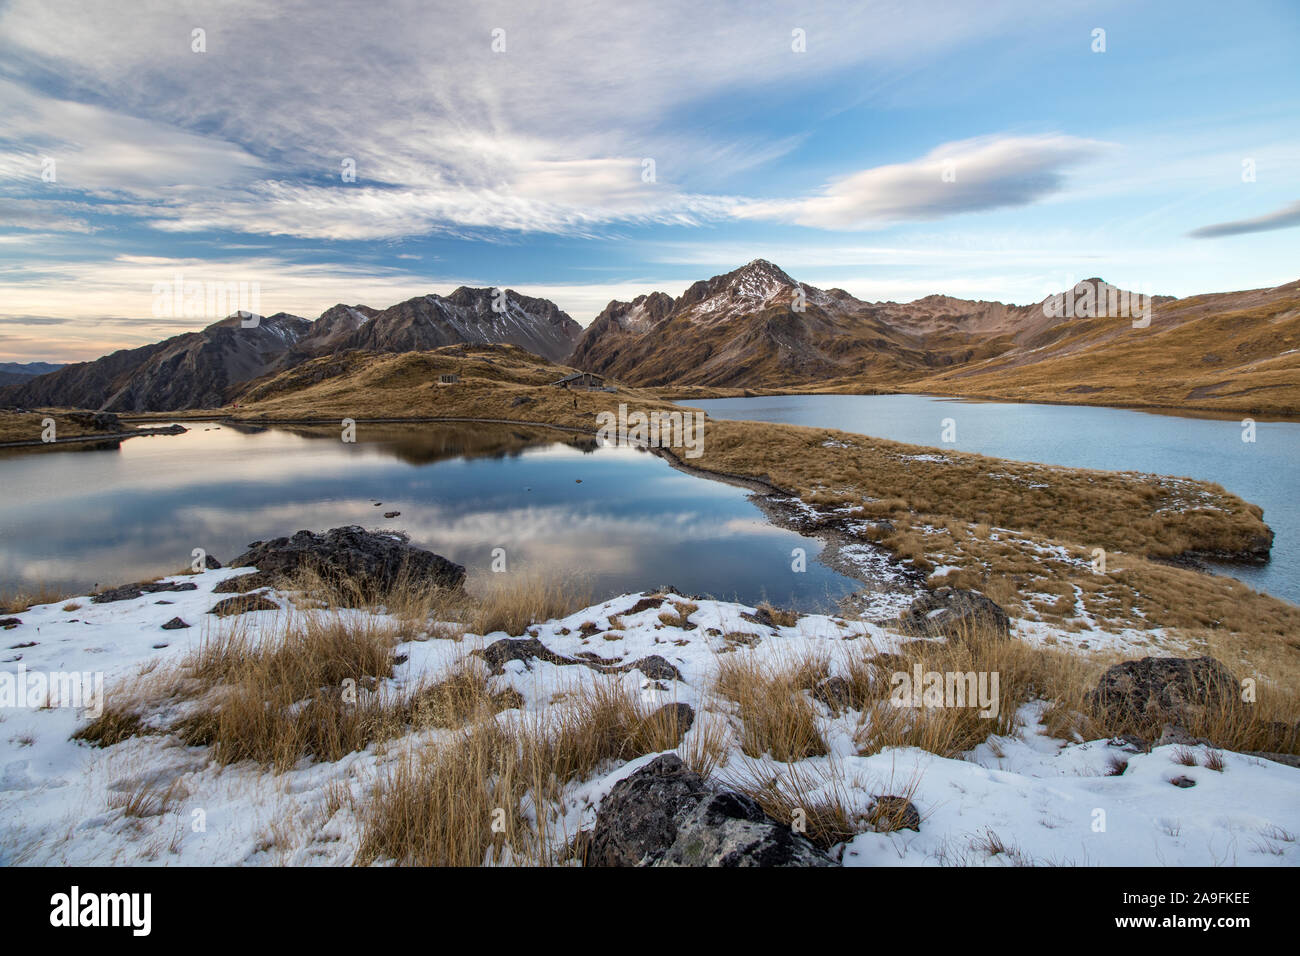 Angelus lakes mirroring fine clouds and blue sky after sunset. Rocky mountains in background with snow, tussock. Angelus mountain hut in the middle Stock Photo